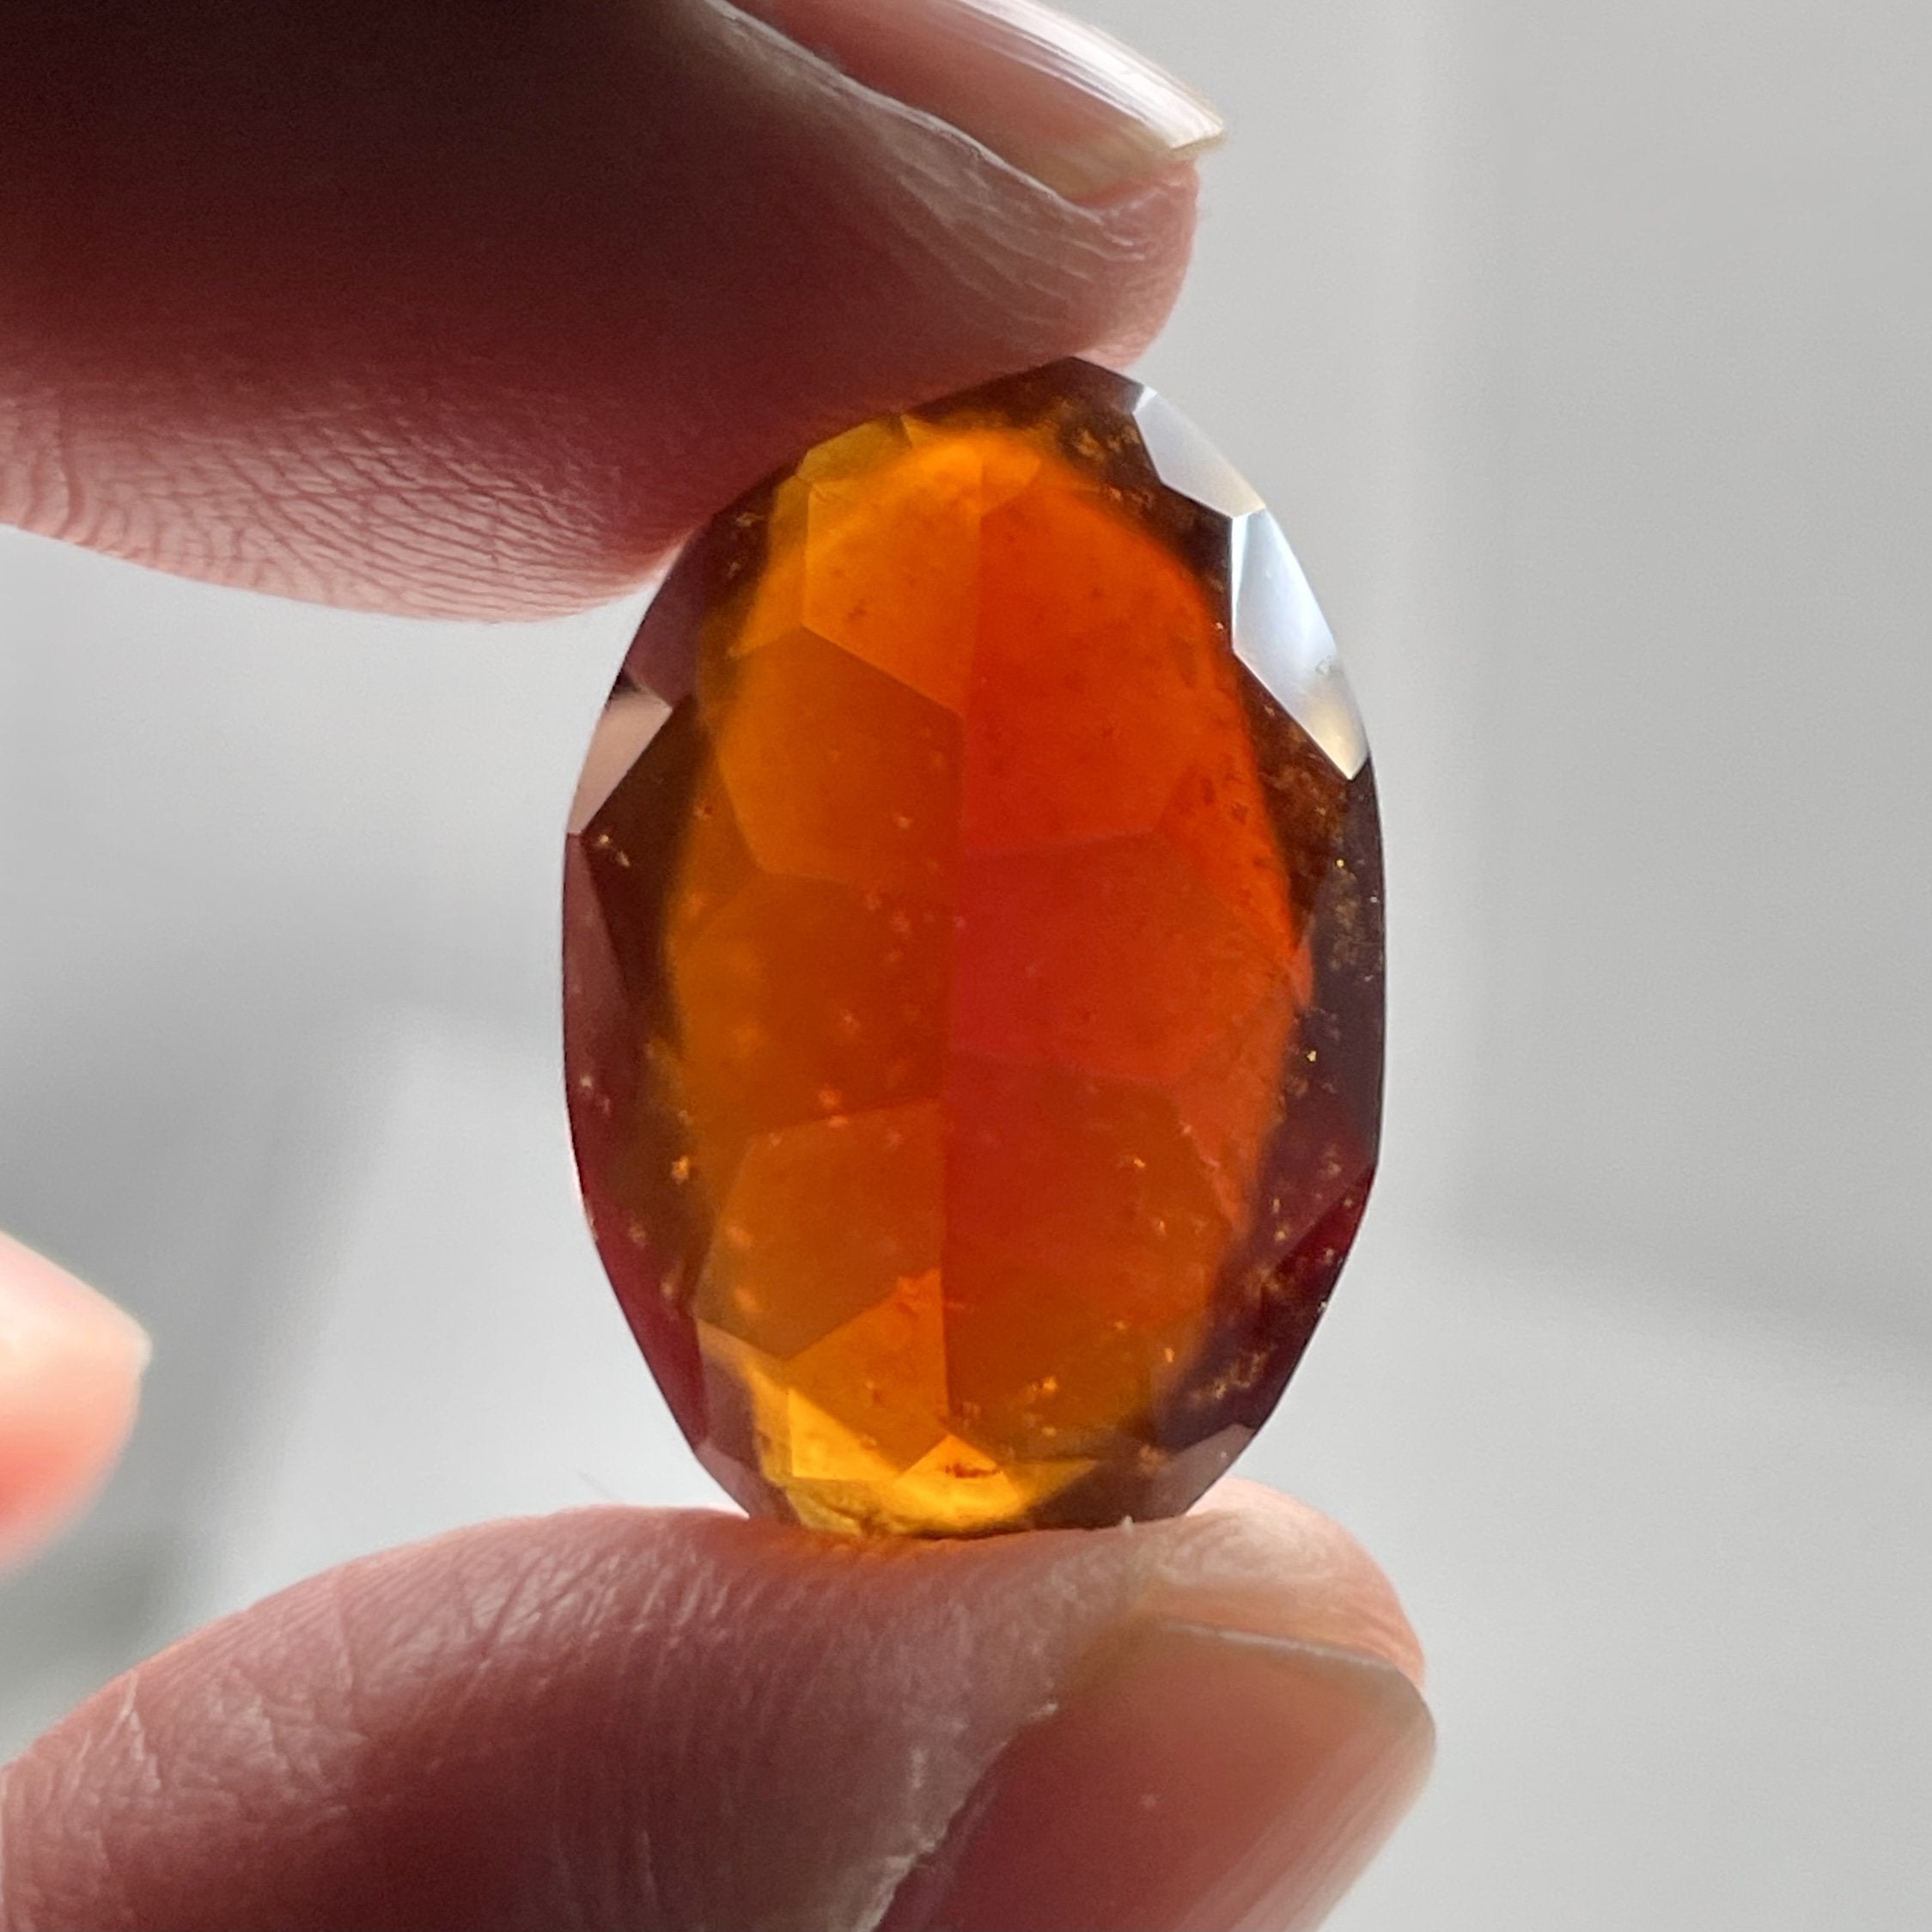 20.13Ct Hessonite Garnet Tanzania Untreated Unheated. 21.2 X 13.5 8 Mm. Use Either Side.